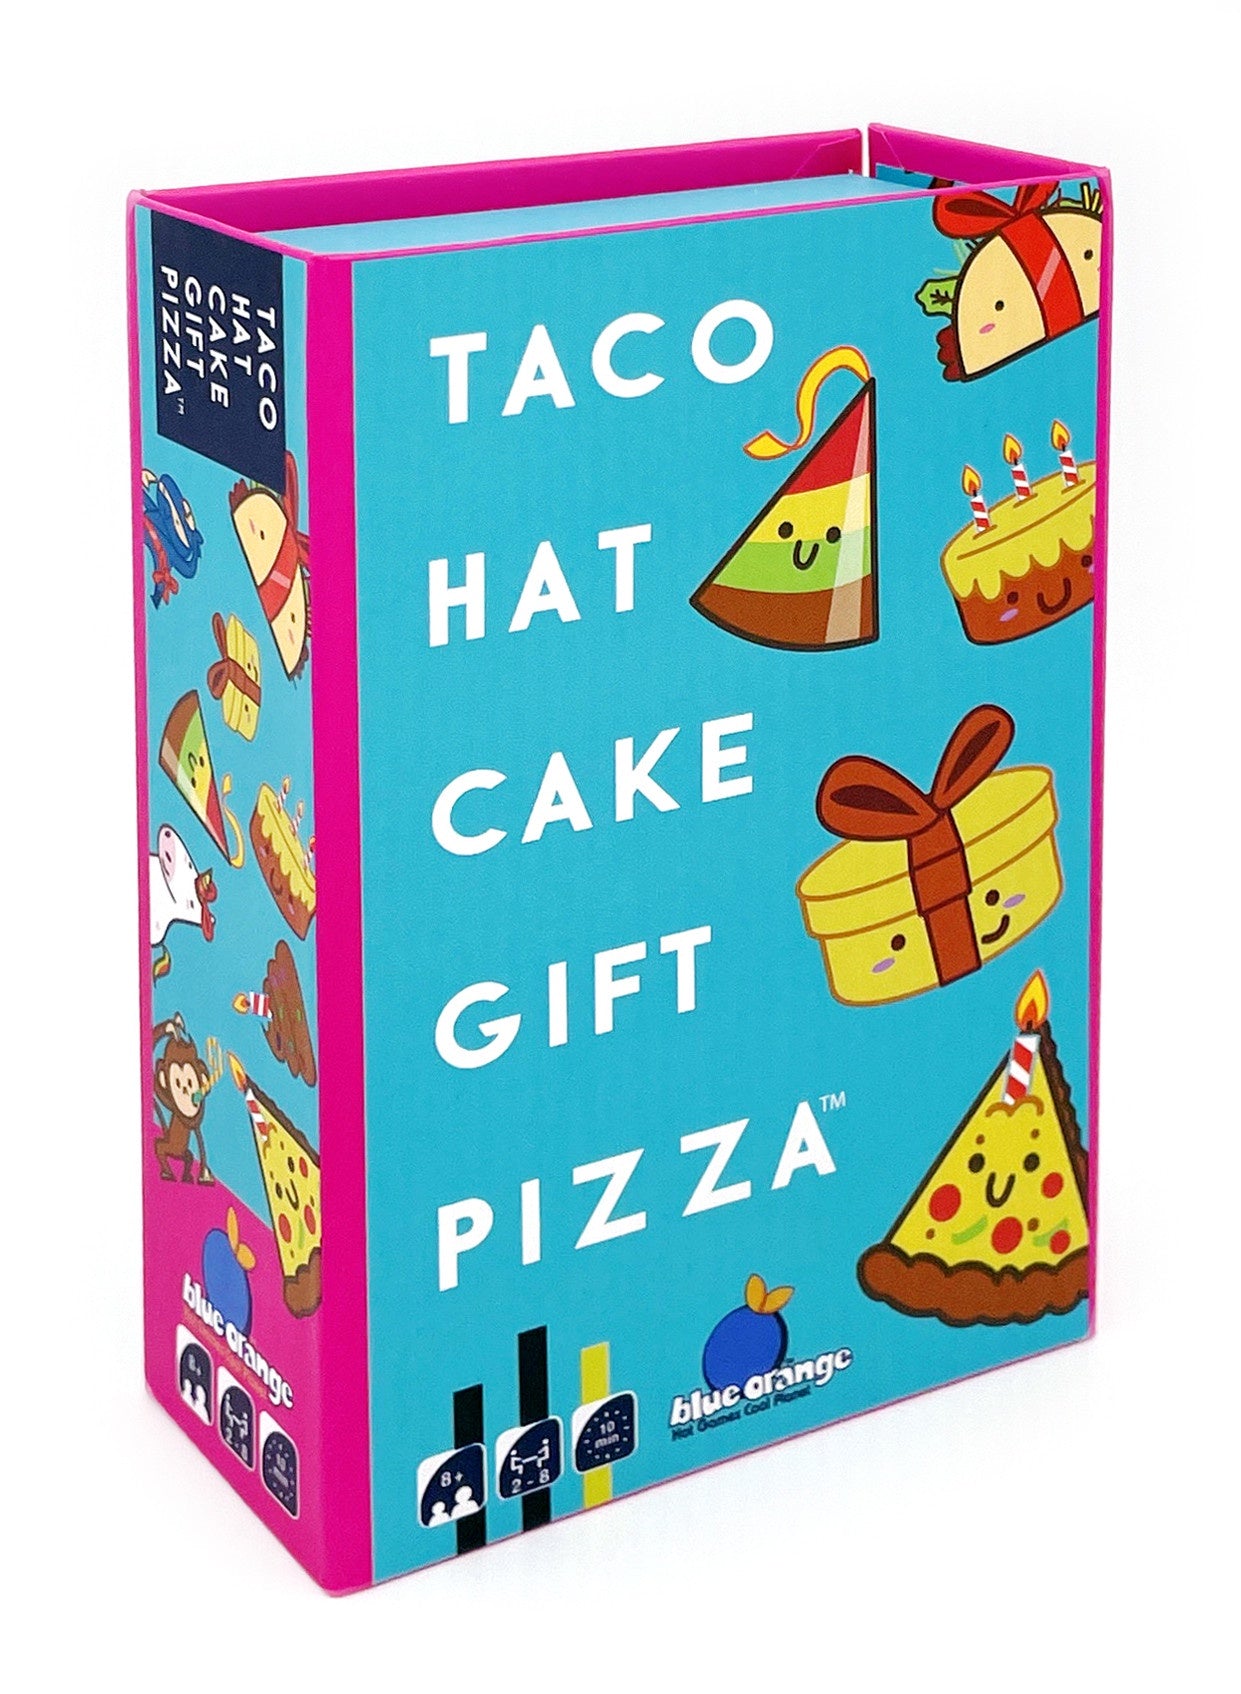 Taco Hat Cake Gift Pizza - Card Game